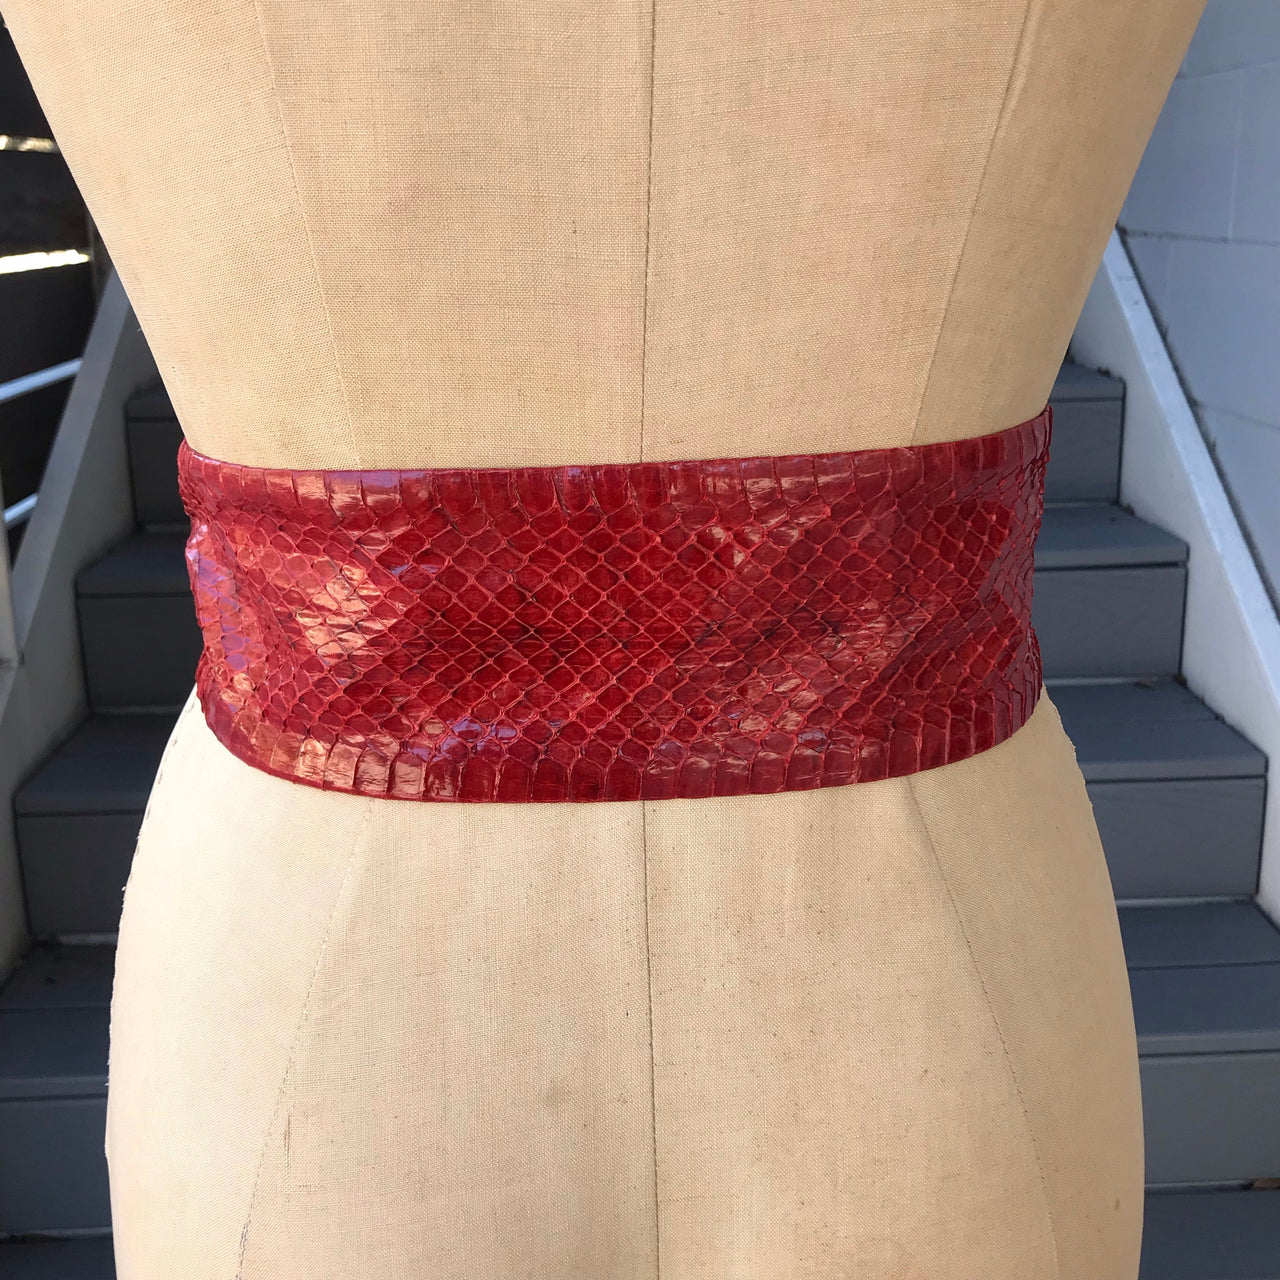 Red Snakeskin Belt with Goldtone Douglas Paquette Belt Buckle Accessory Bloomers and Frocks 